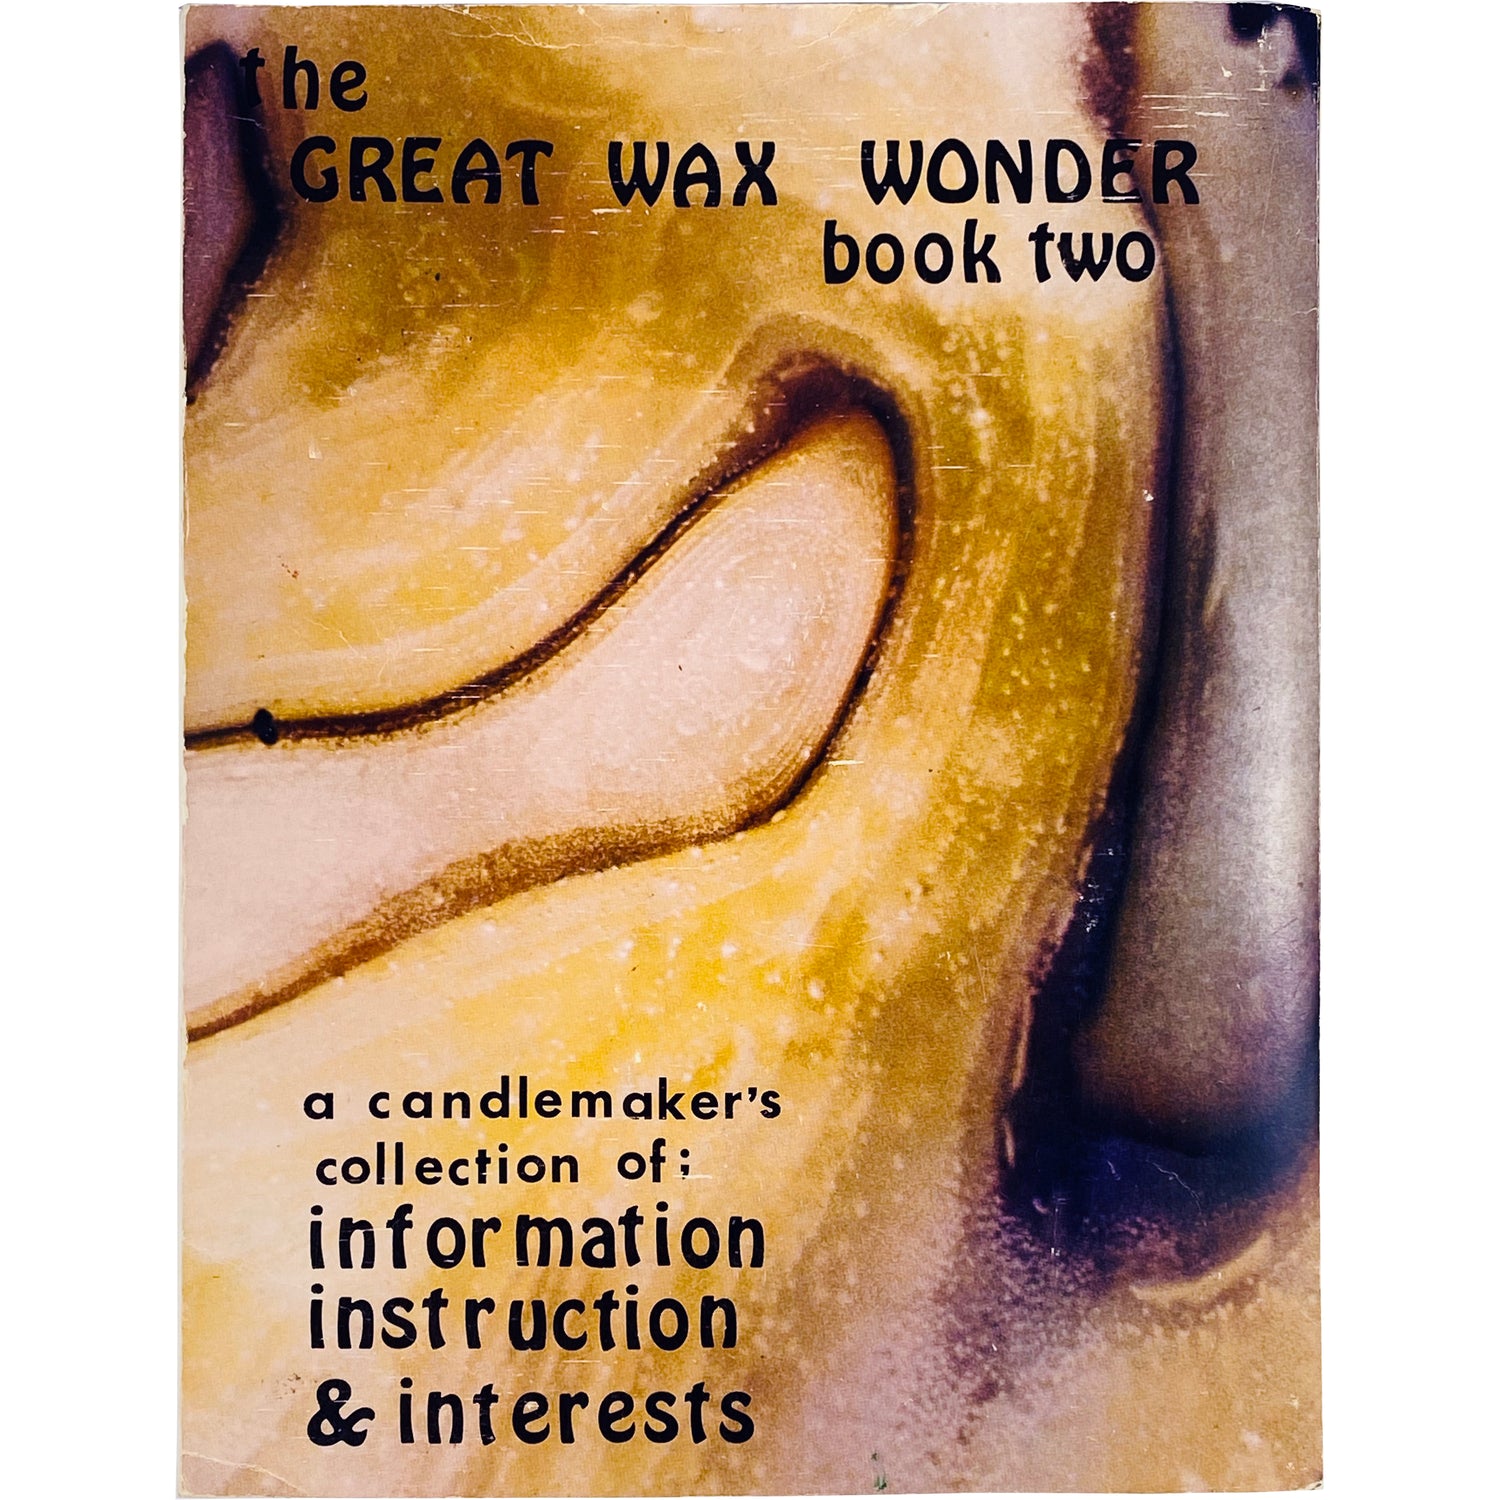 THE GREAT WAX WONDER - BOOK TWO